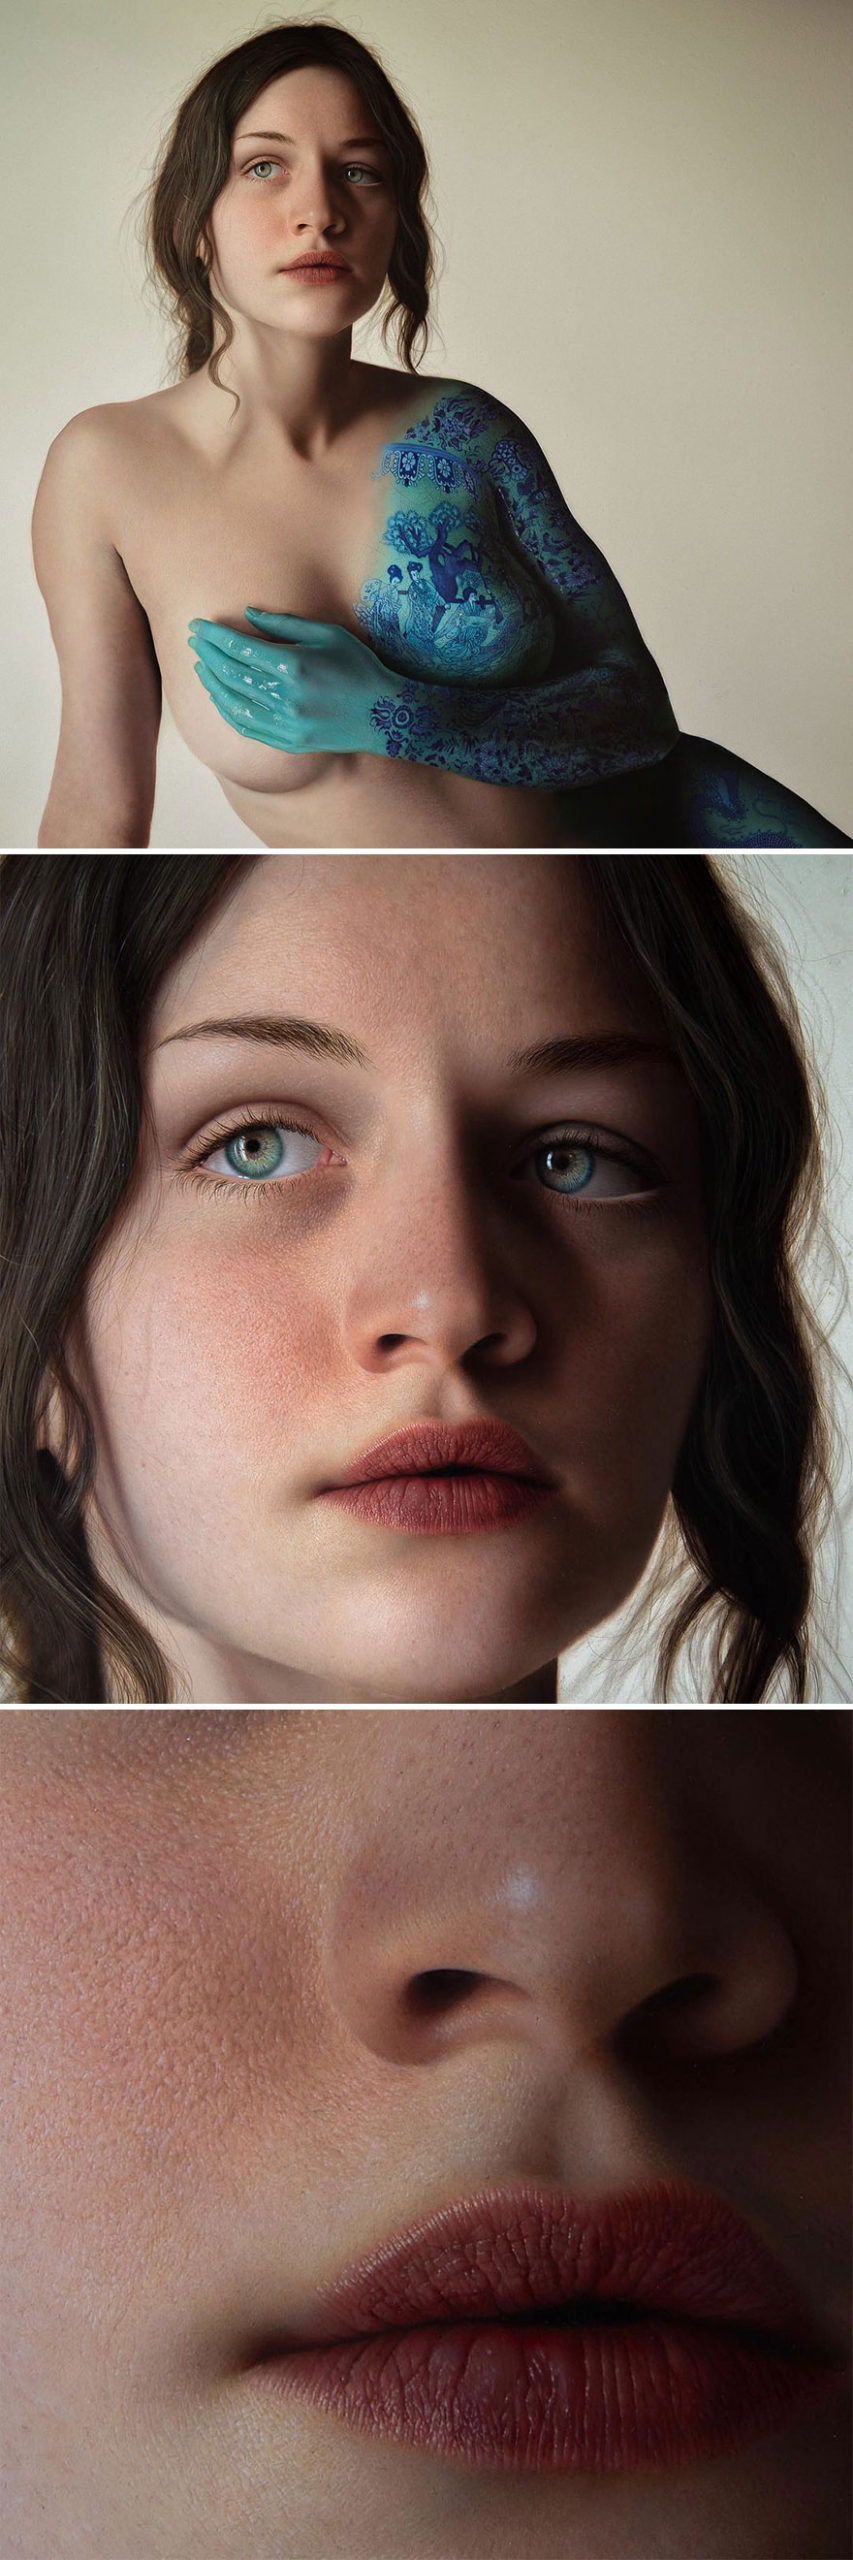 Unveiling Marco Grassis Astonishing Realistic Paintings A Fusion Of Hyperrealism And Surrealism New Pics 6613b15f5aa25 880